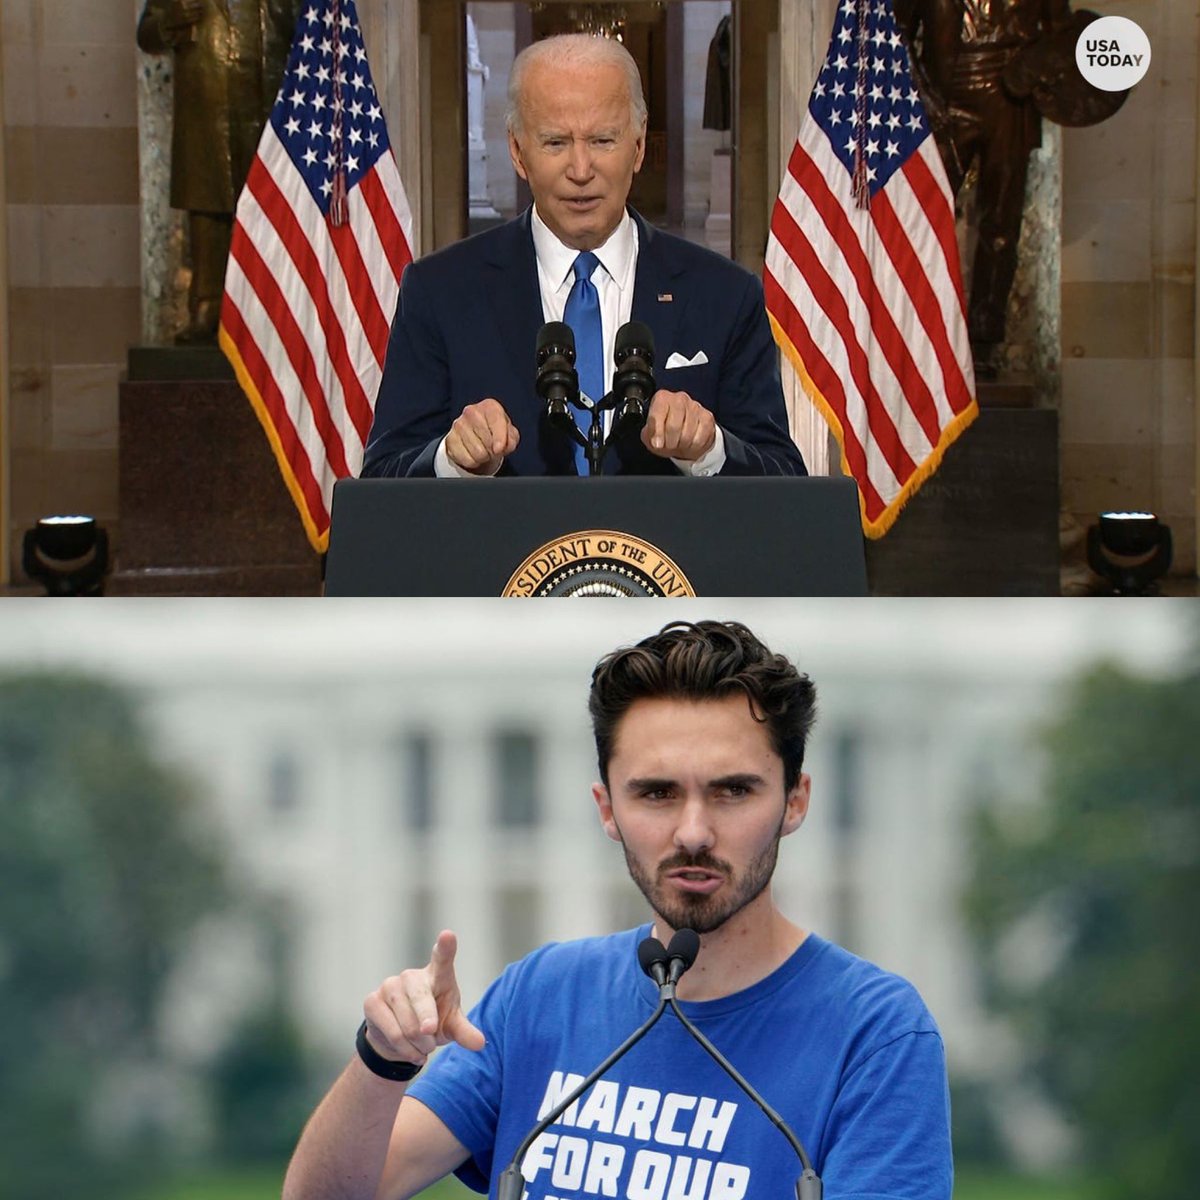 Yes or No, David Hogg and President Biden are correct, We need to Ban the AR-15 and all assault weapons IMMEDIATELY! ENOUGH IS ENOUGH!